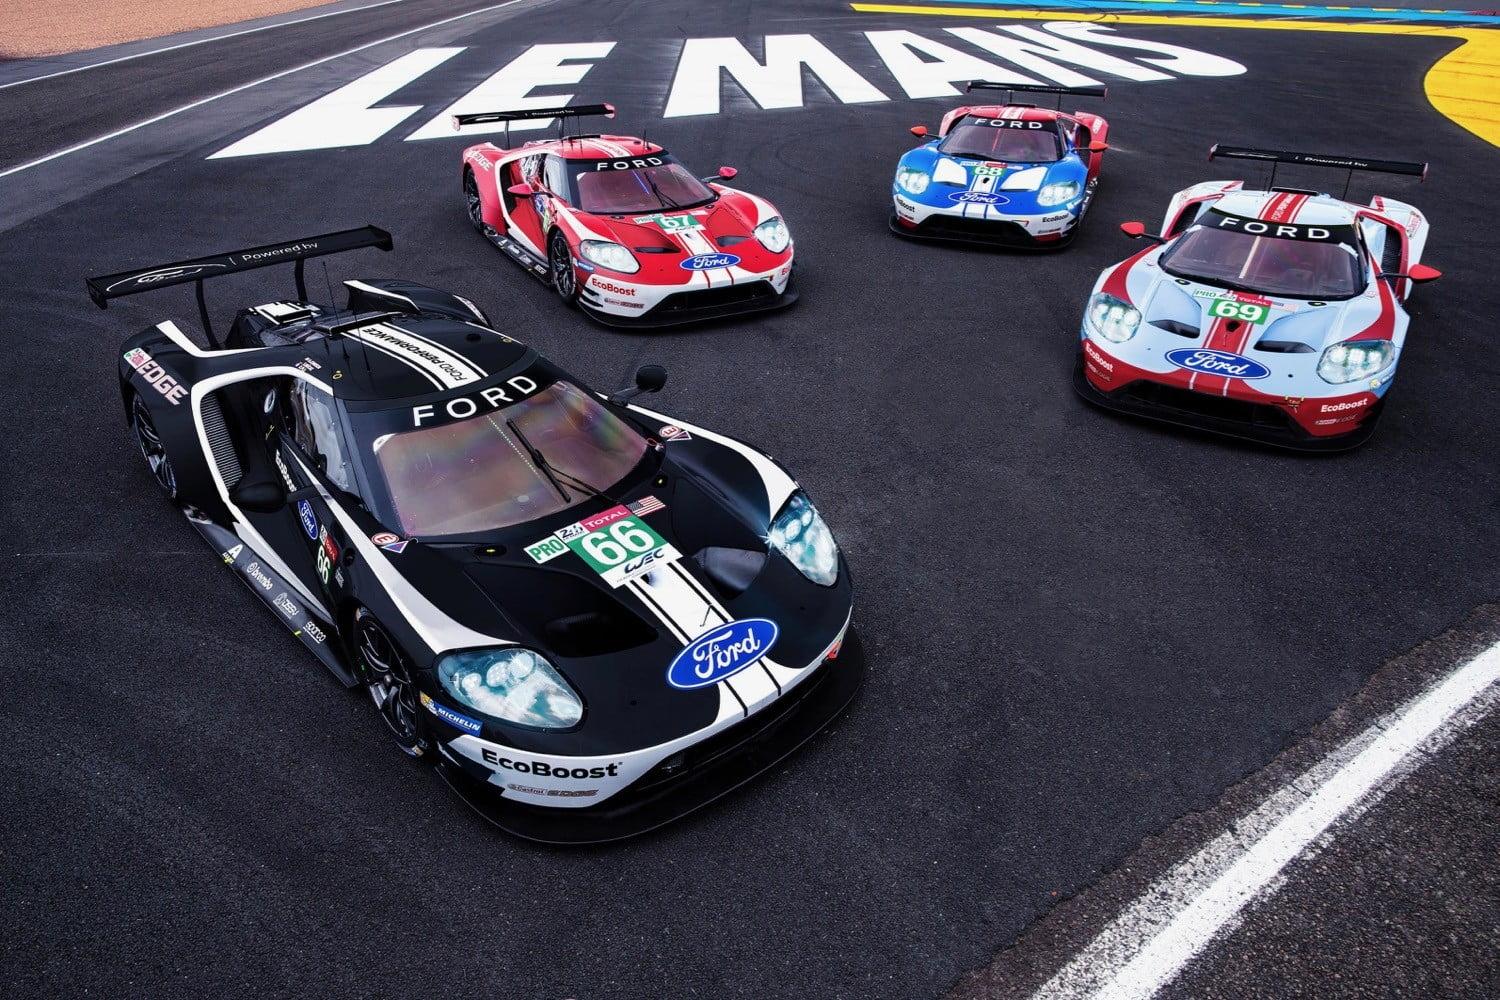 C:\Users\Valerio\Desktop\ford-pays-homage-to-le-mans-with-celebration-liveries.jpg